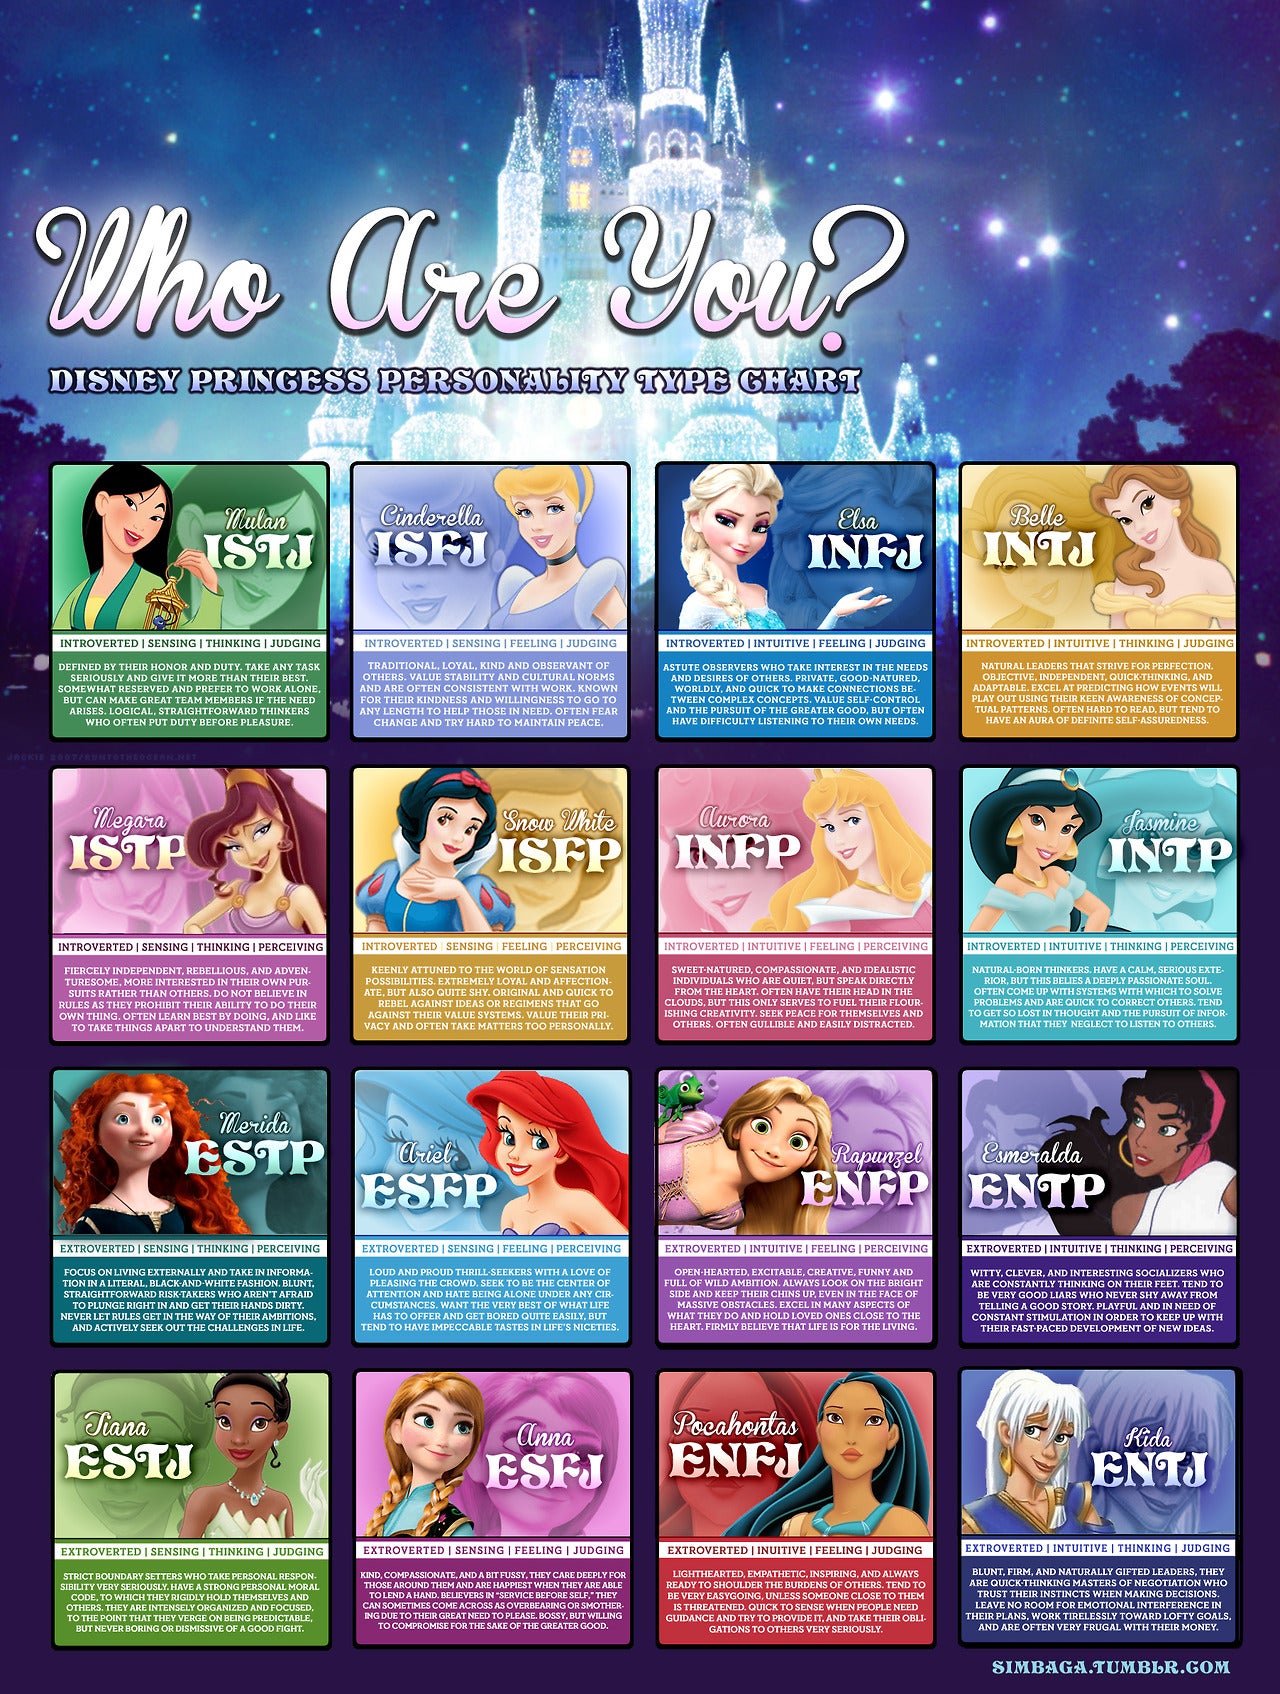 Which Myers-Briggs Disney Princess Are You?